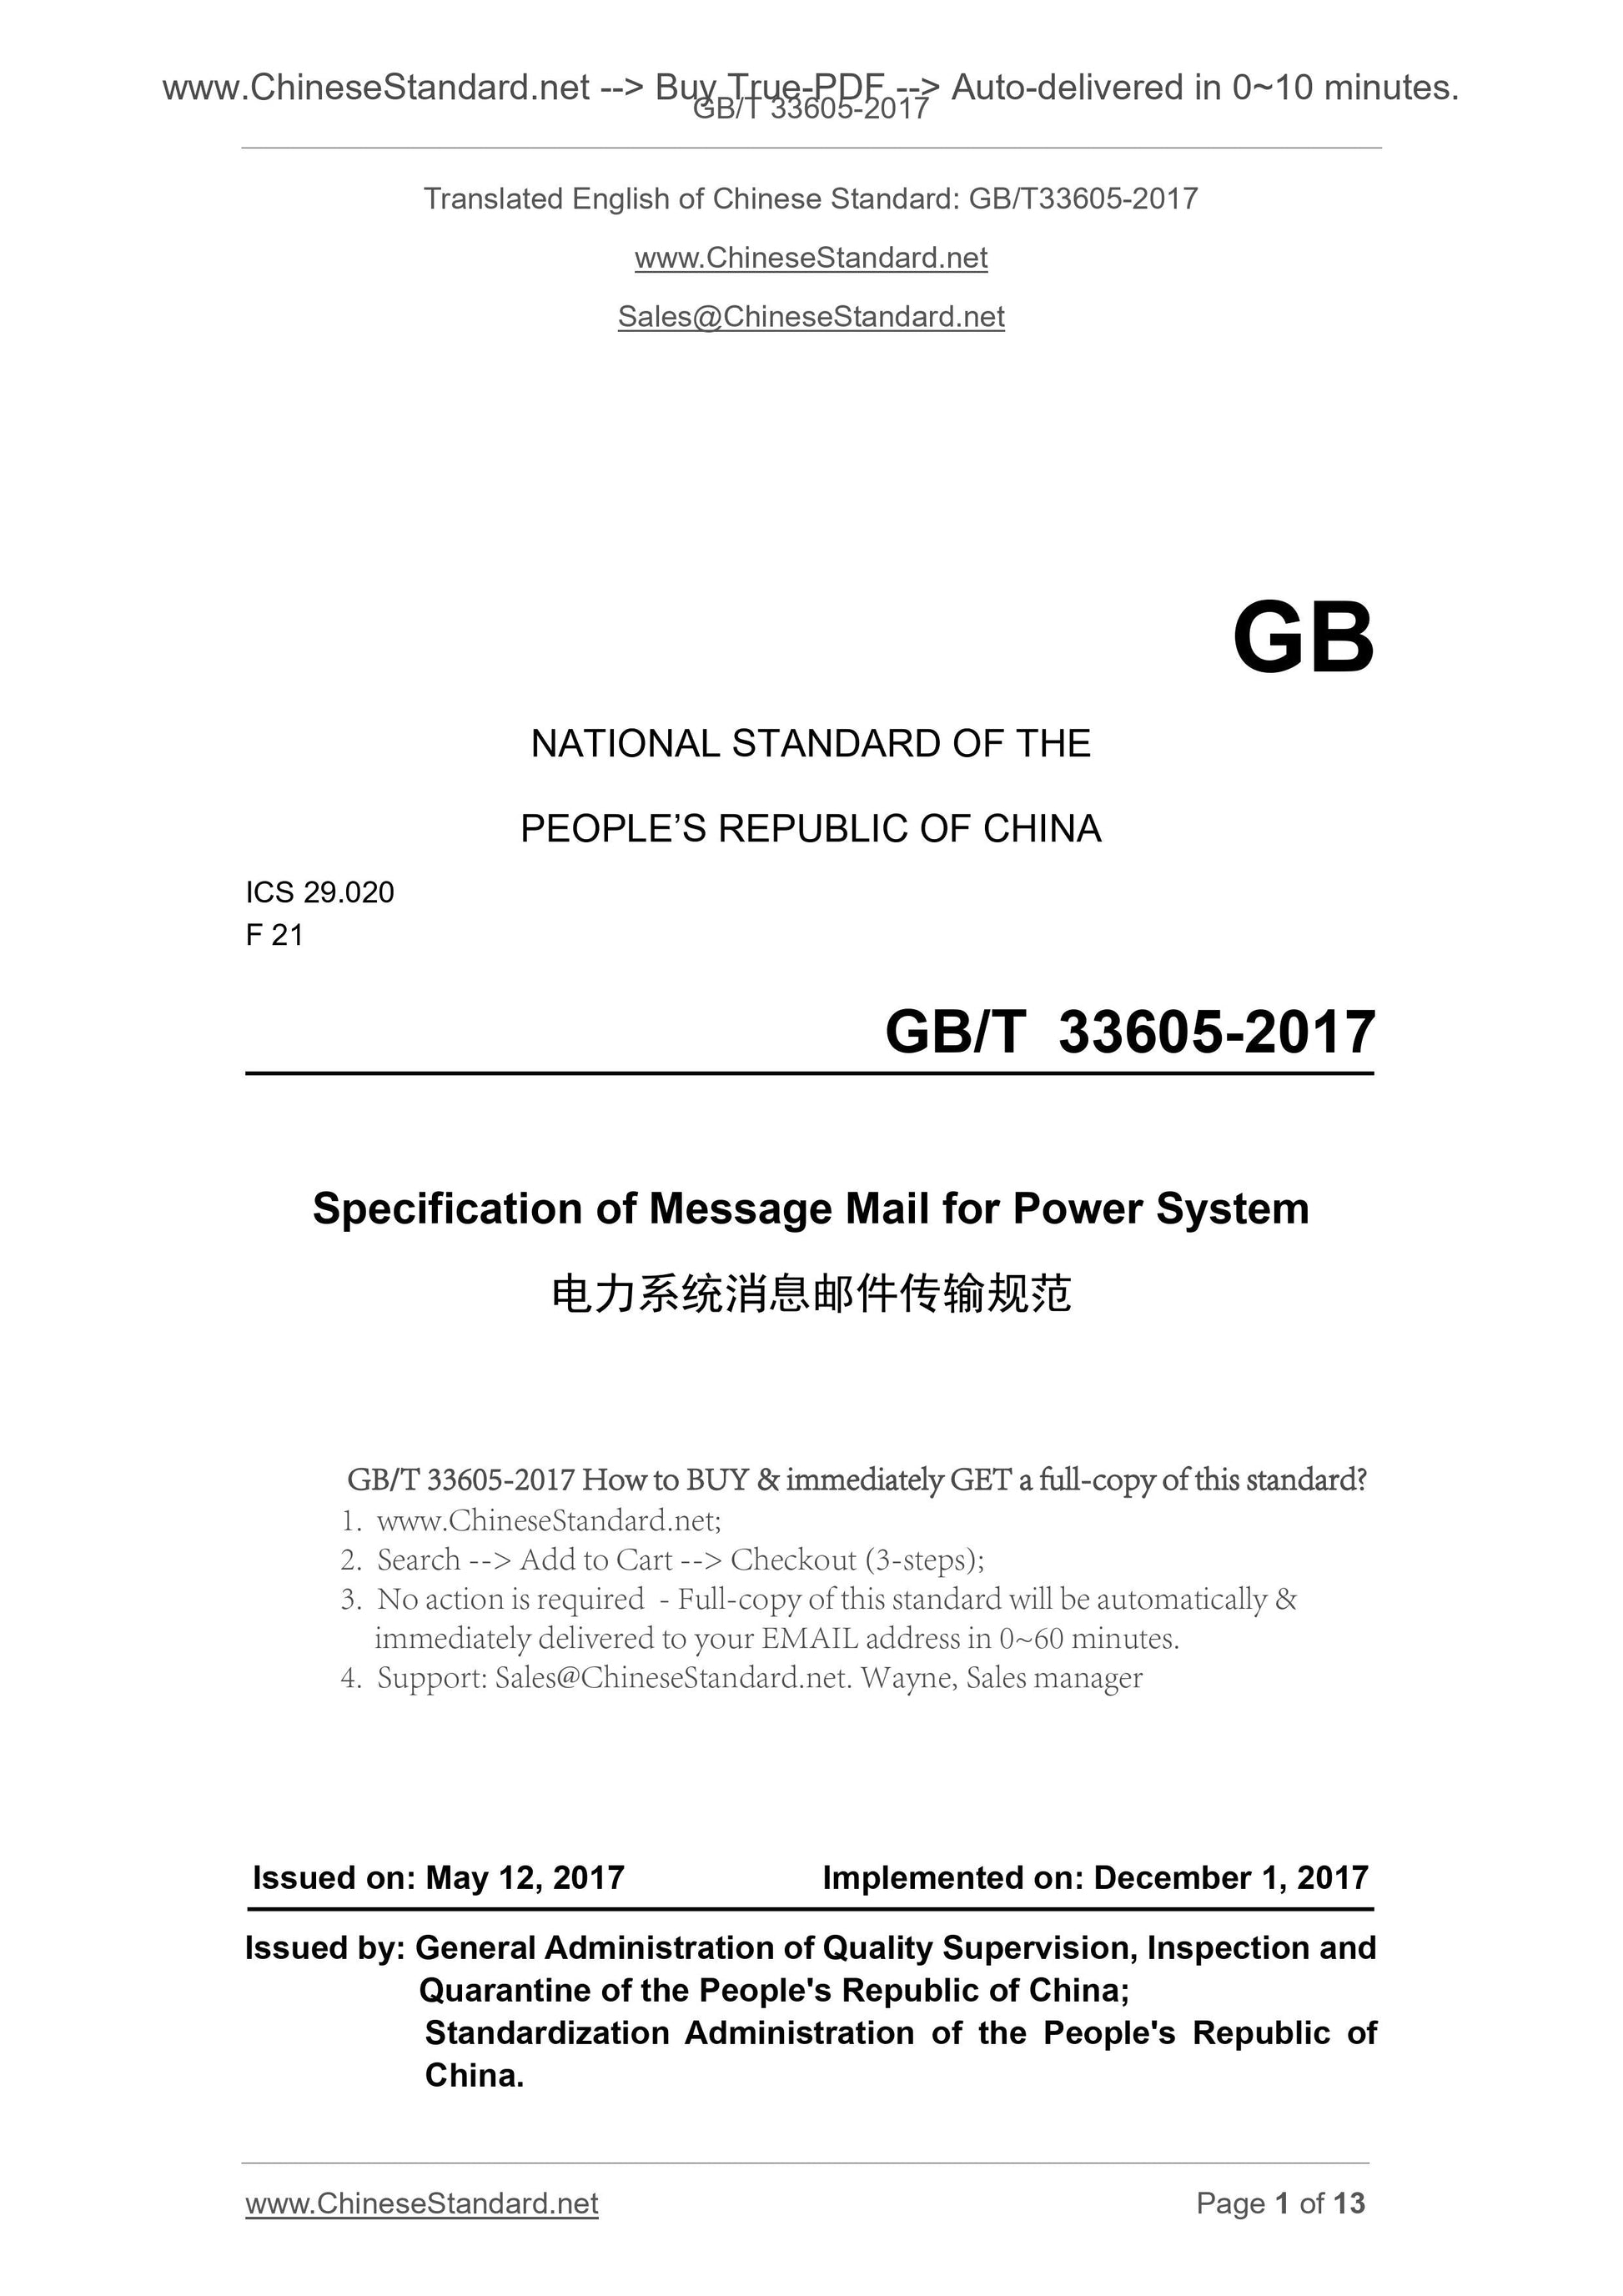 GB/T 33605-2017 Page 1